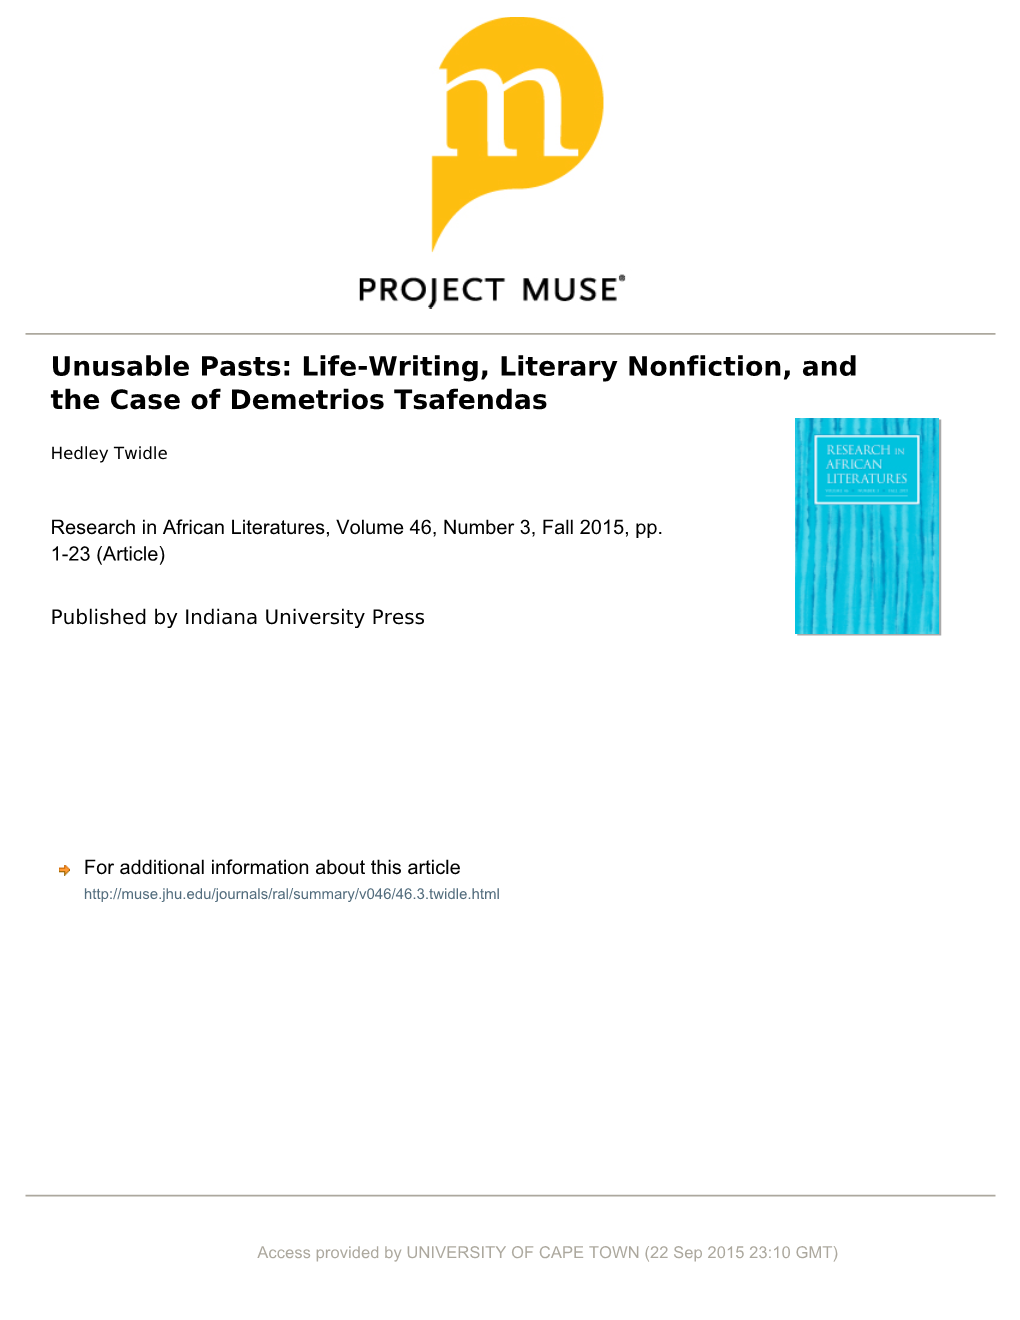 Unusable Pasts: Life-Writing, Literary Nonfiction, and the Case of Demetrios Tsafendas HEDLEY TWIDLE University of Cape Town Hedley.Twidle@Uct.Ac.Za